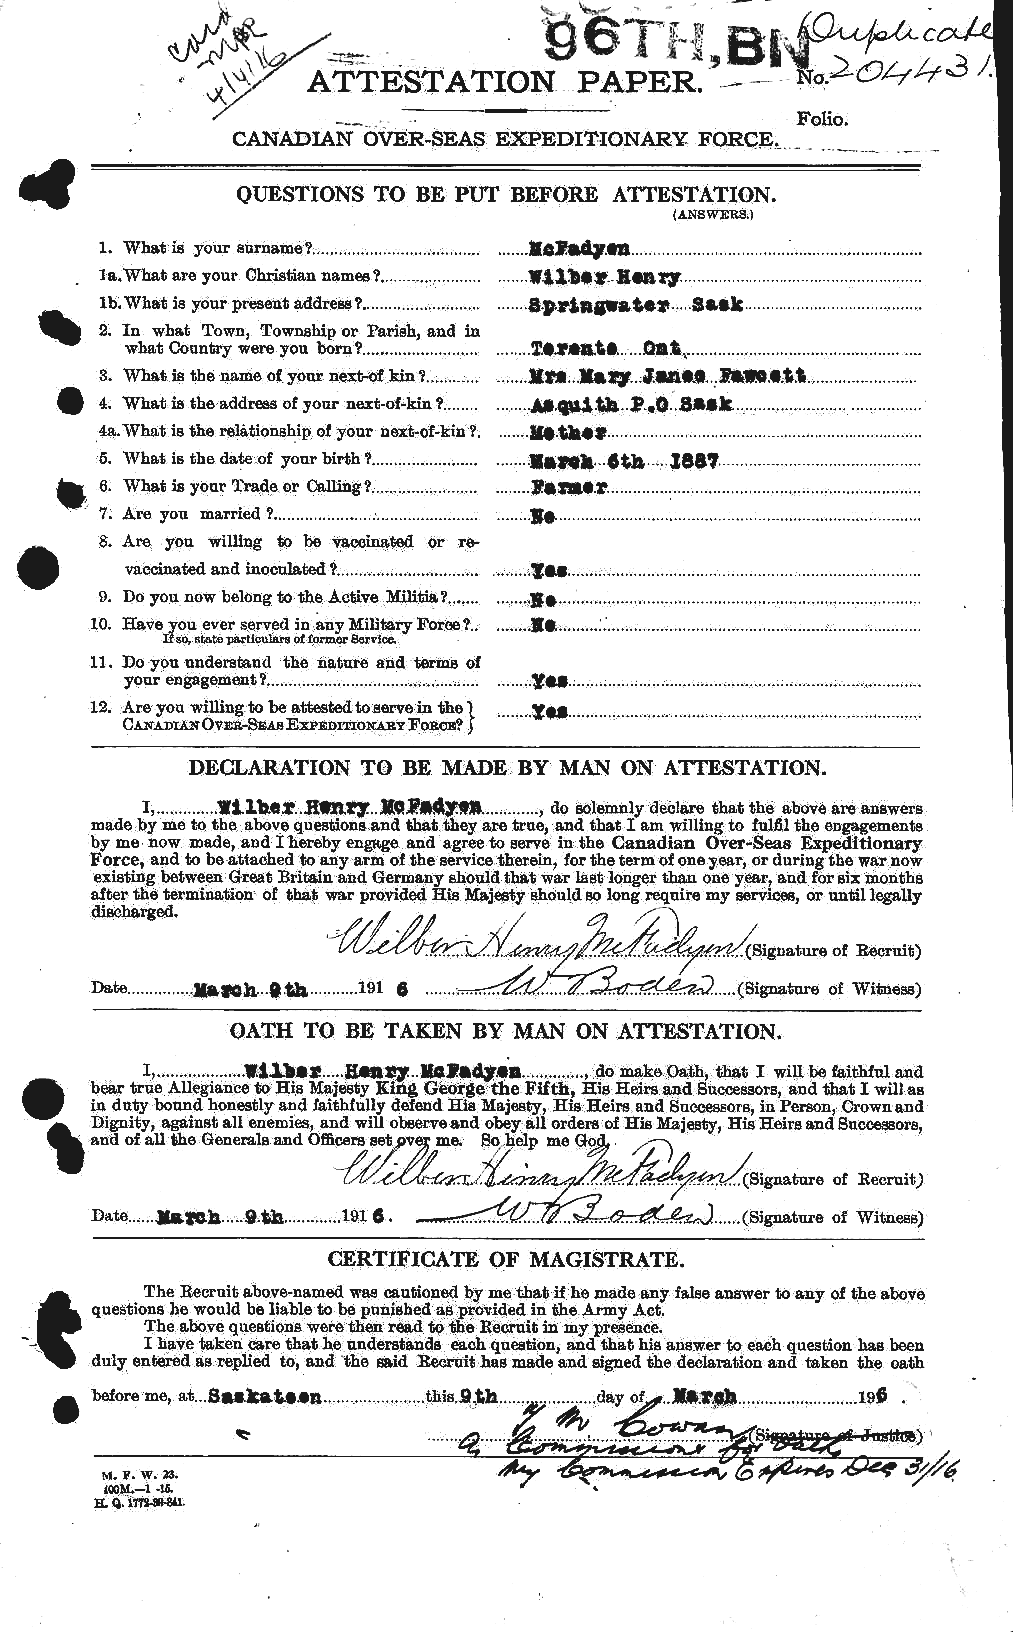 Personnel Records of the First World War - CEF 521219a